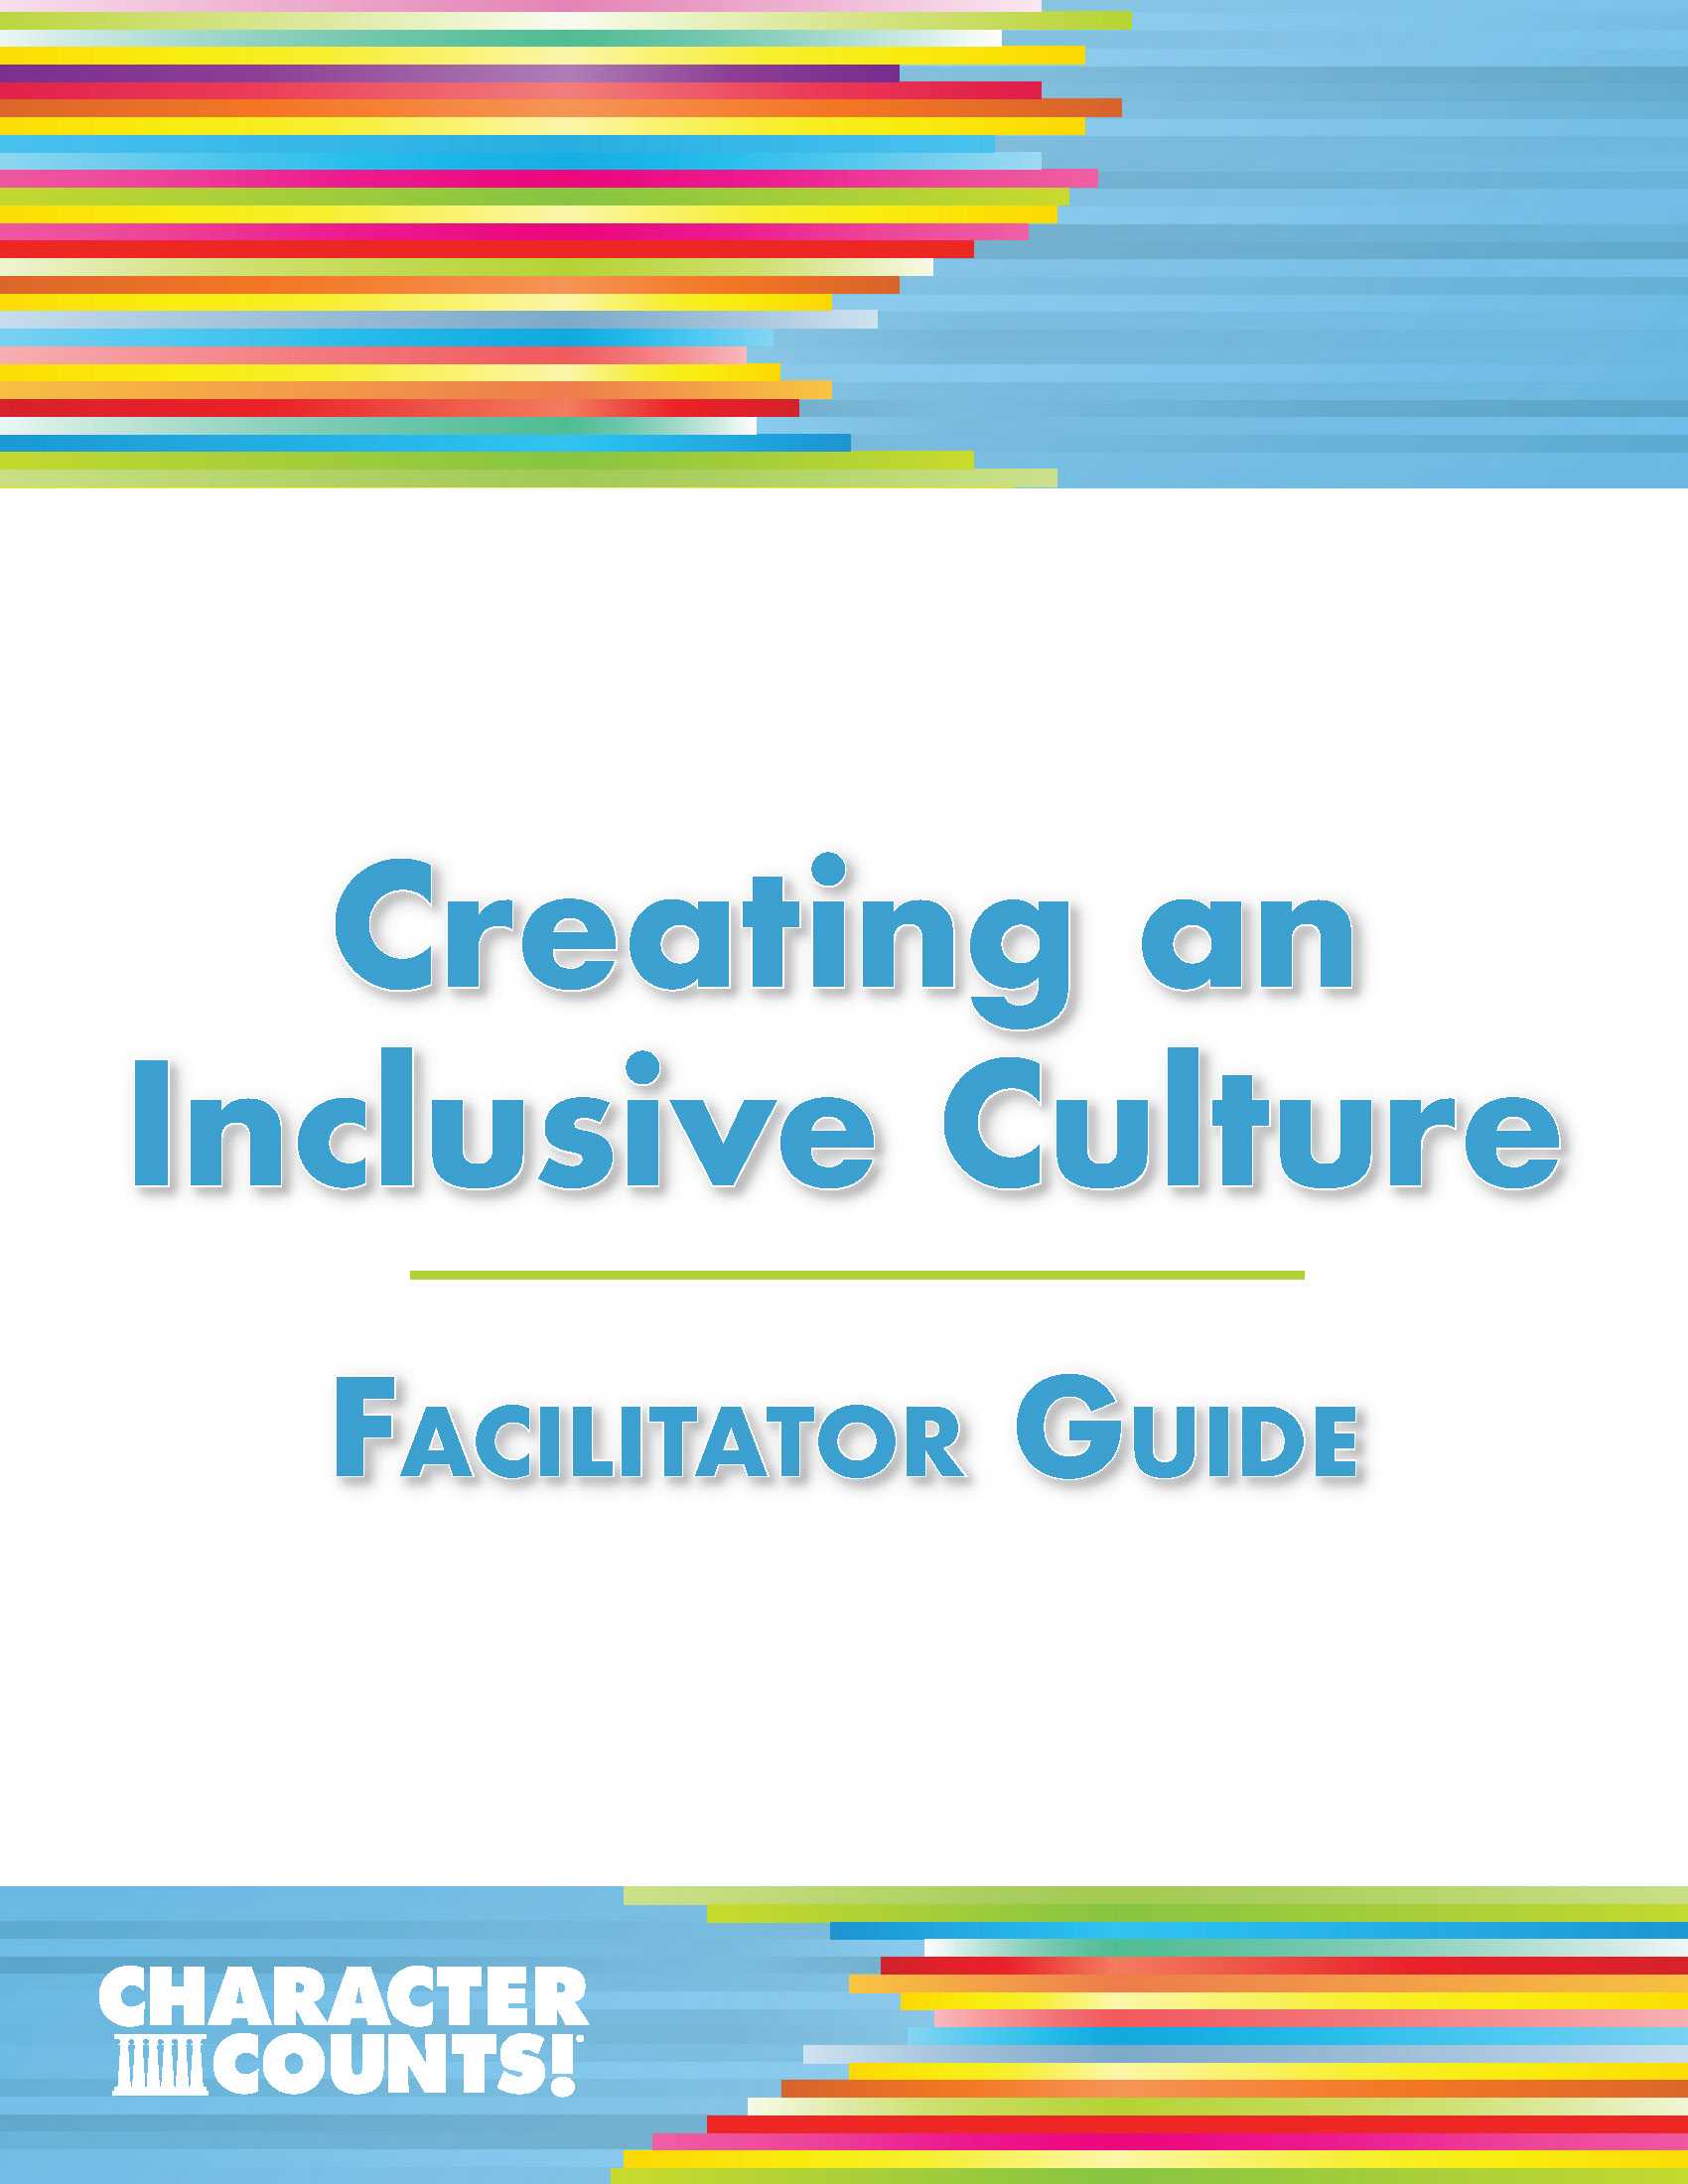 Creating an Inclusive Culture